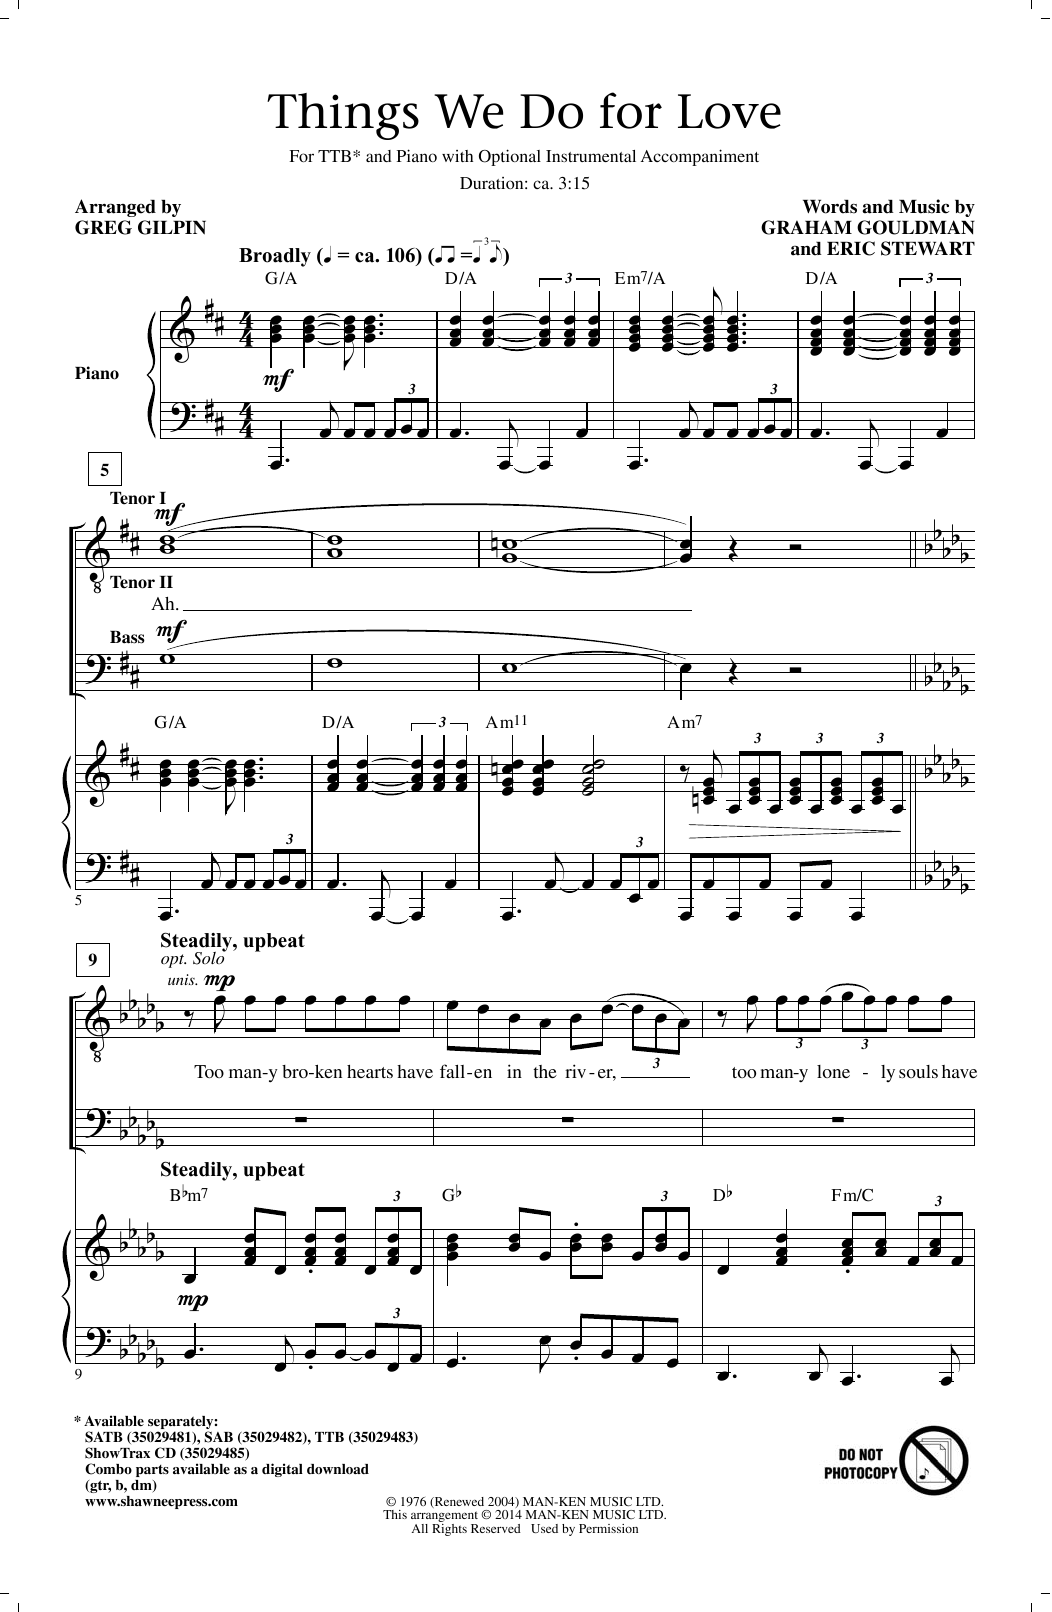 Download Greg Gilpin Things We Do For Love Sheet Music